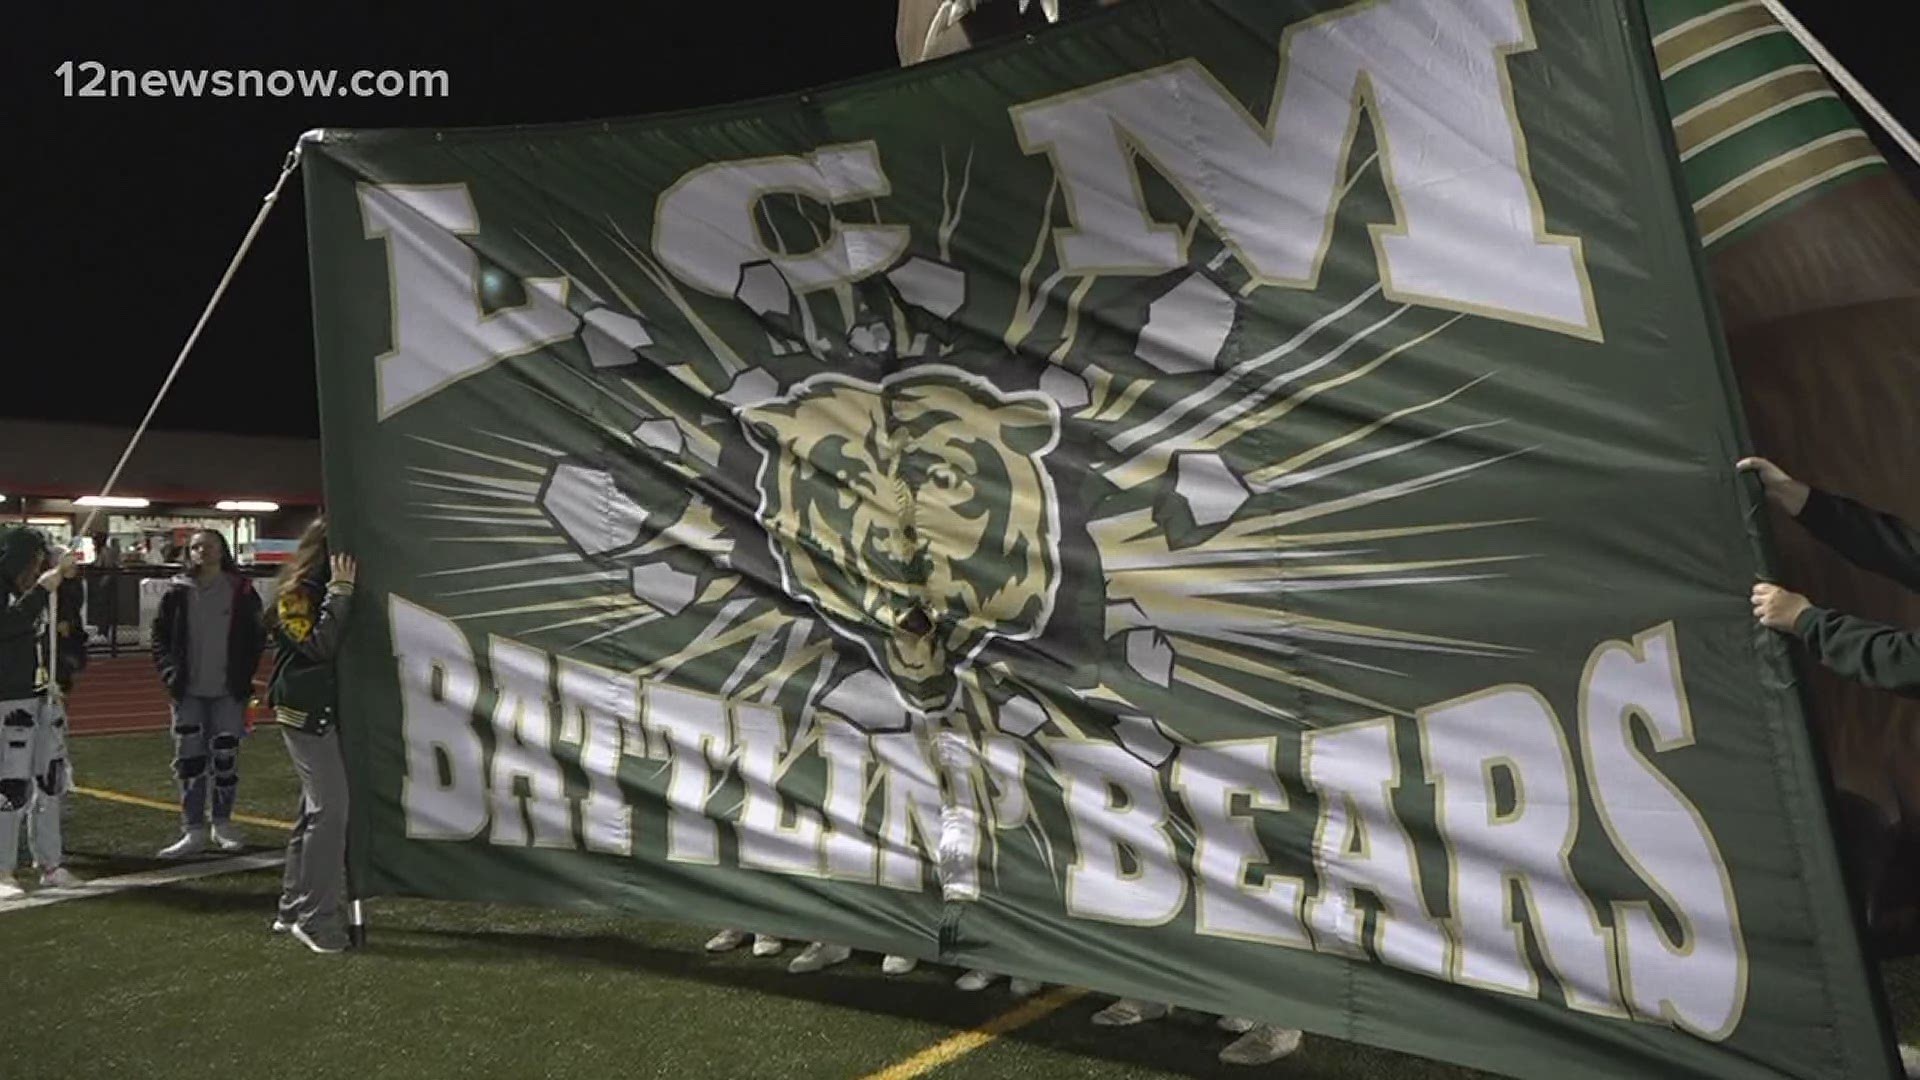 LCM picked up their first playoff win since 1997 last season